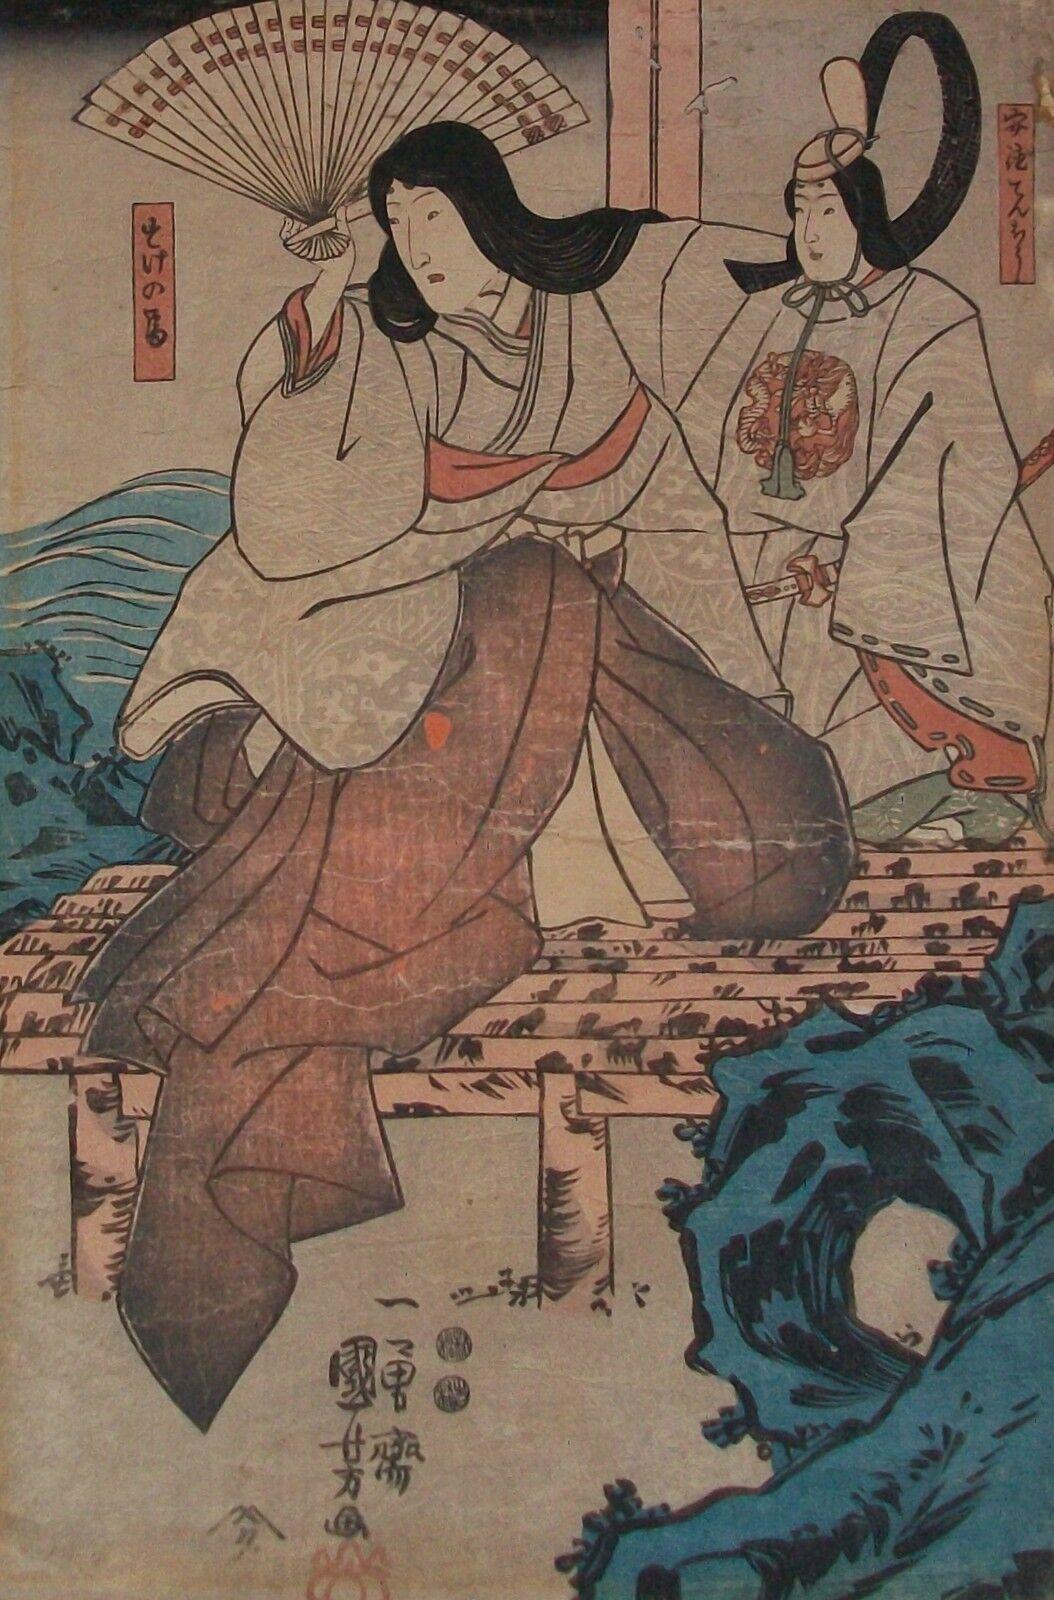 UTAGAWA KUNIYOSHI (1797-1861) - Antique woodblock print - from the actor series - third print only (part of a triptych) - contained in a vintage matte - unframed - Japan - circa 1847.

Good antique condition - worm/age holes - wrinkles and creases